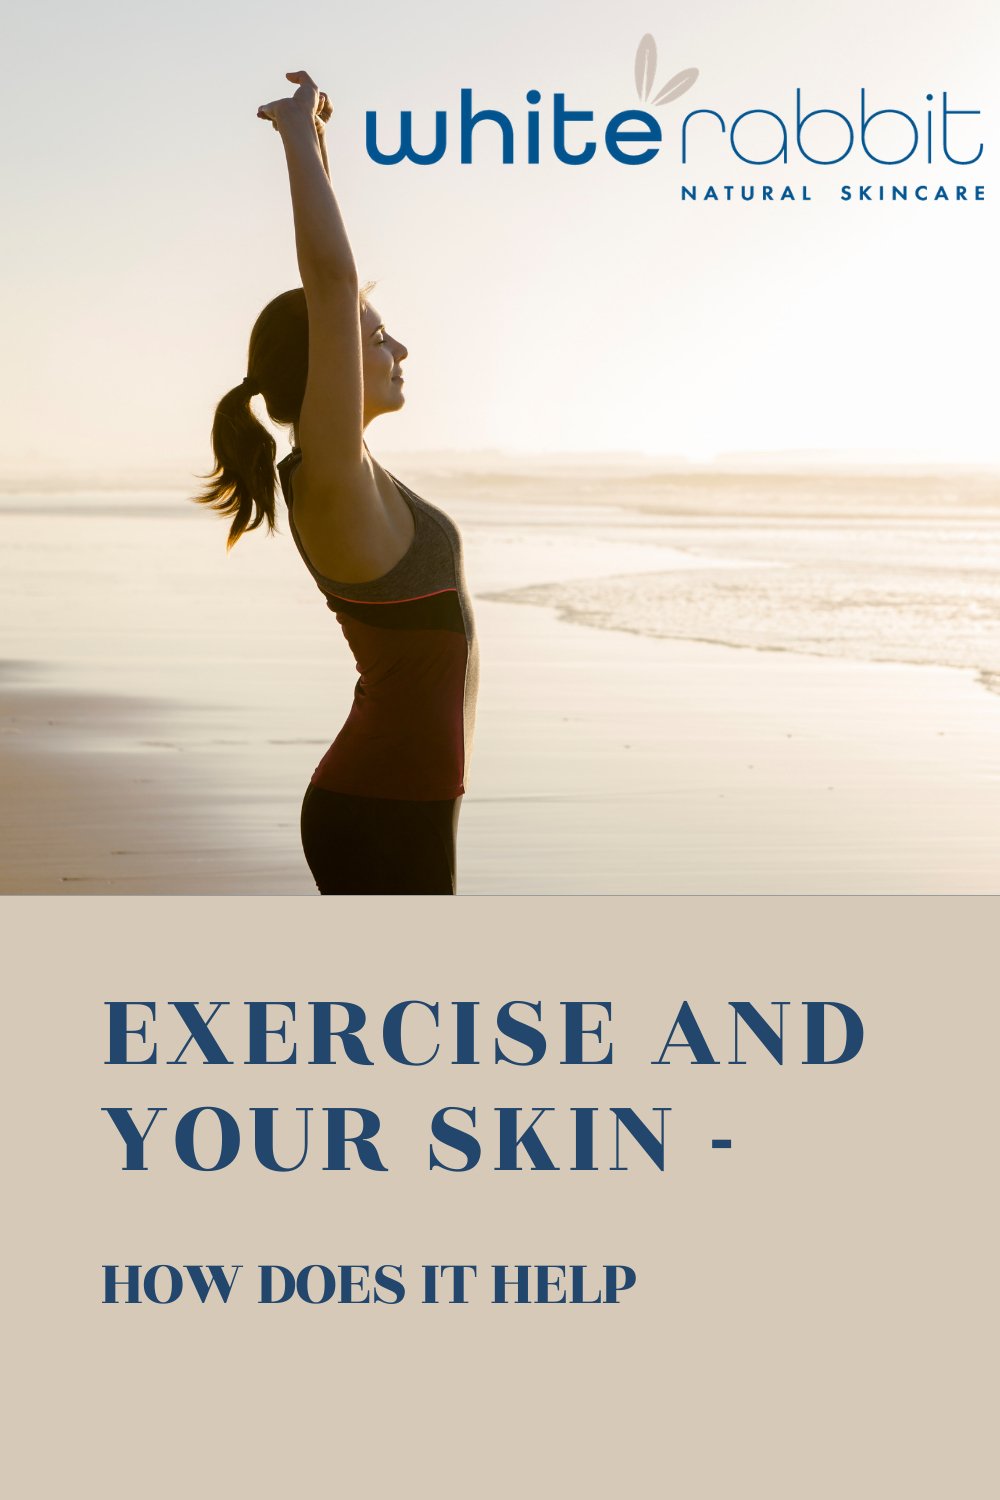 Exercise and Your Skin - how it does it help - White Rabbit Skin Care